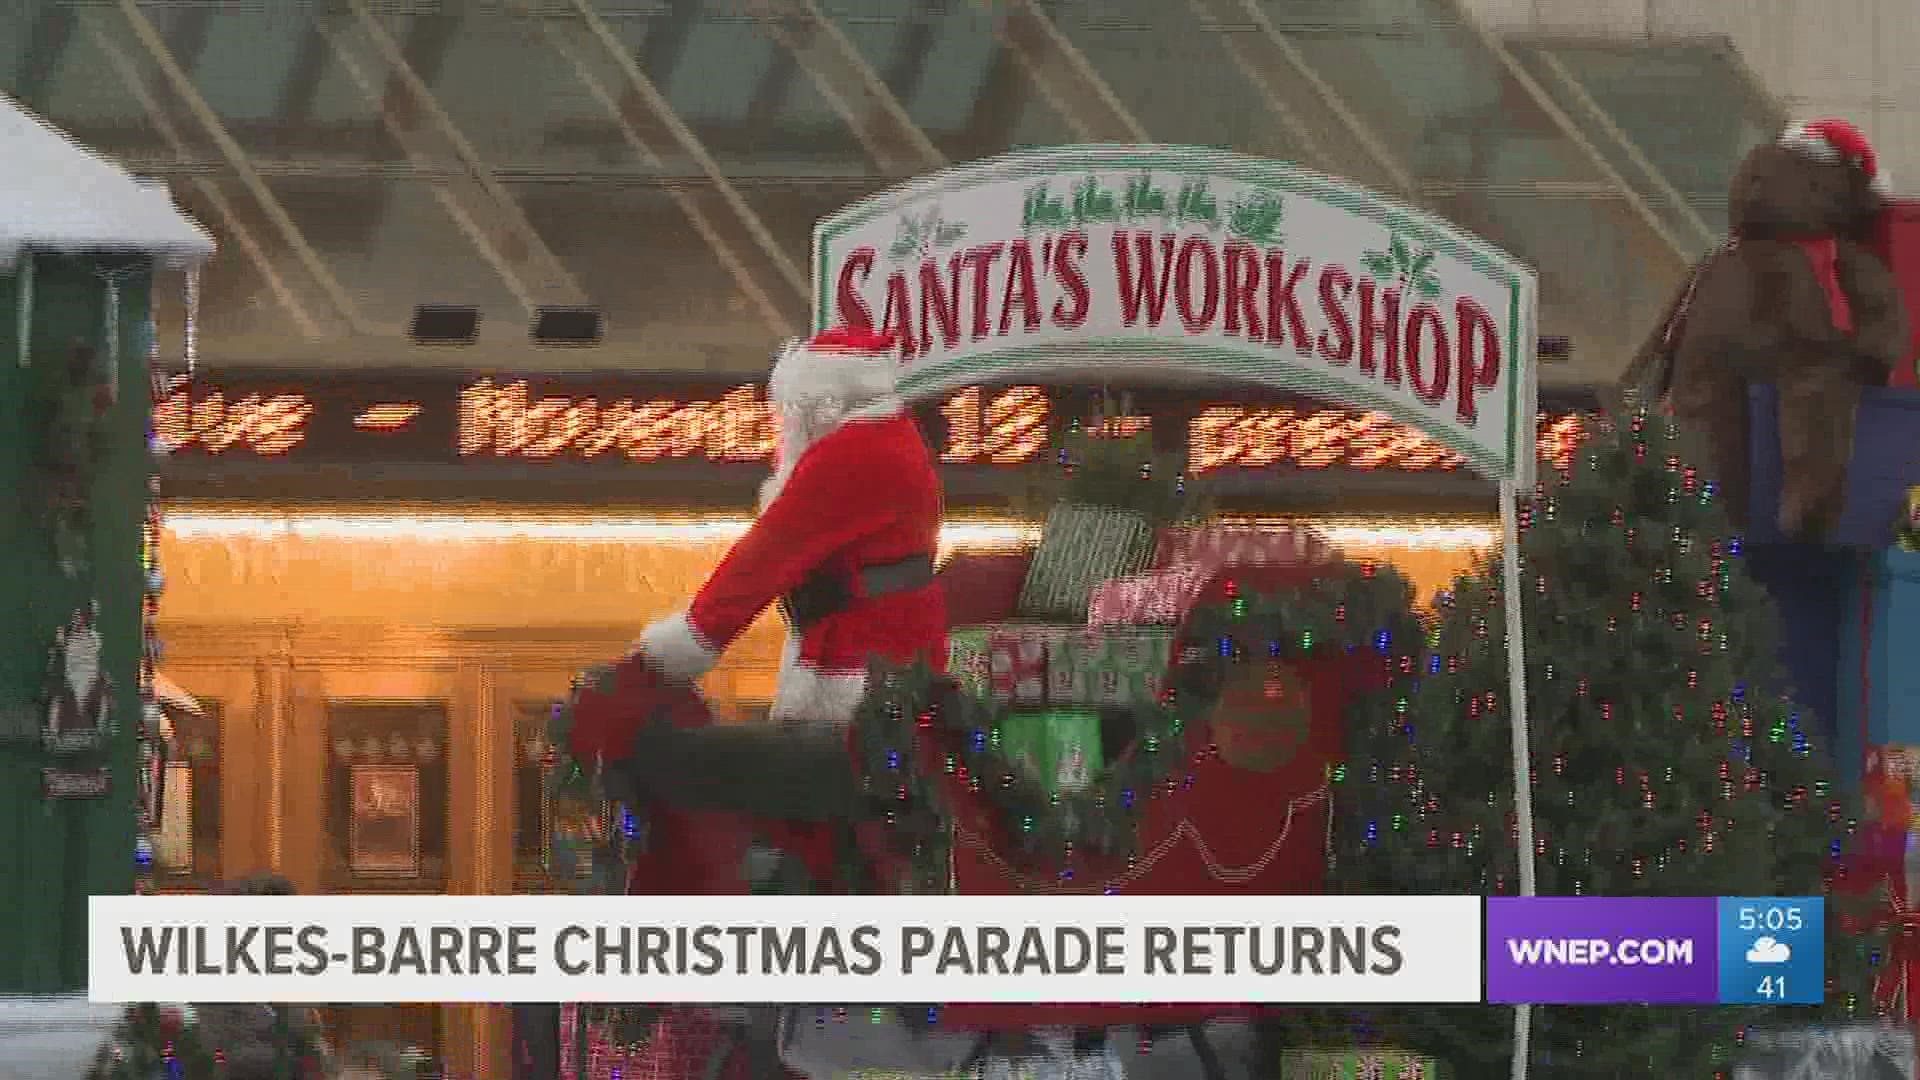 The parade will start at 3 p.m. and end at Public Square with a Tree lighting ceremony with Santa.